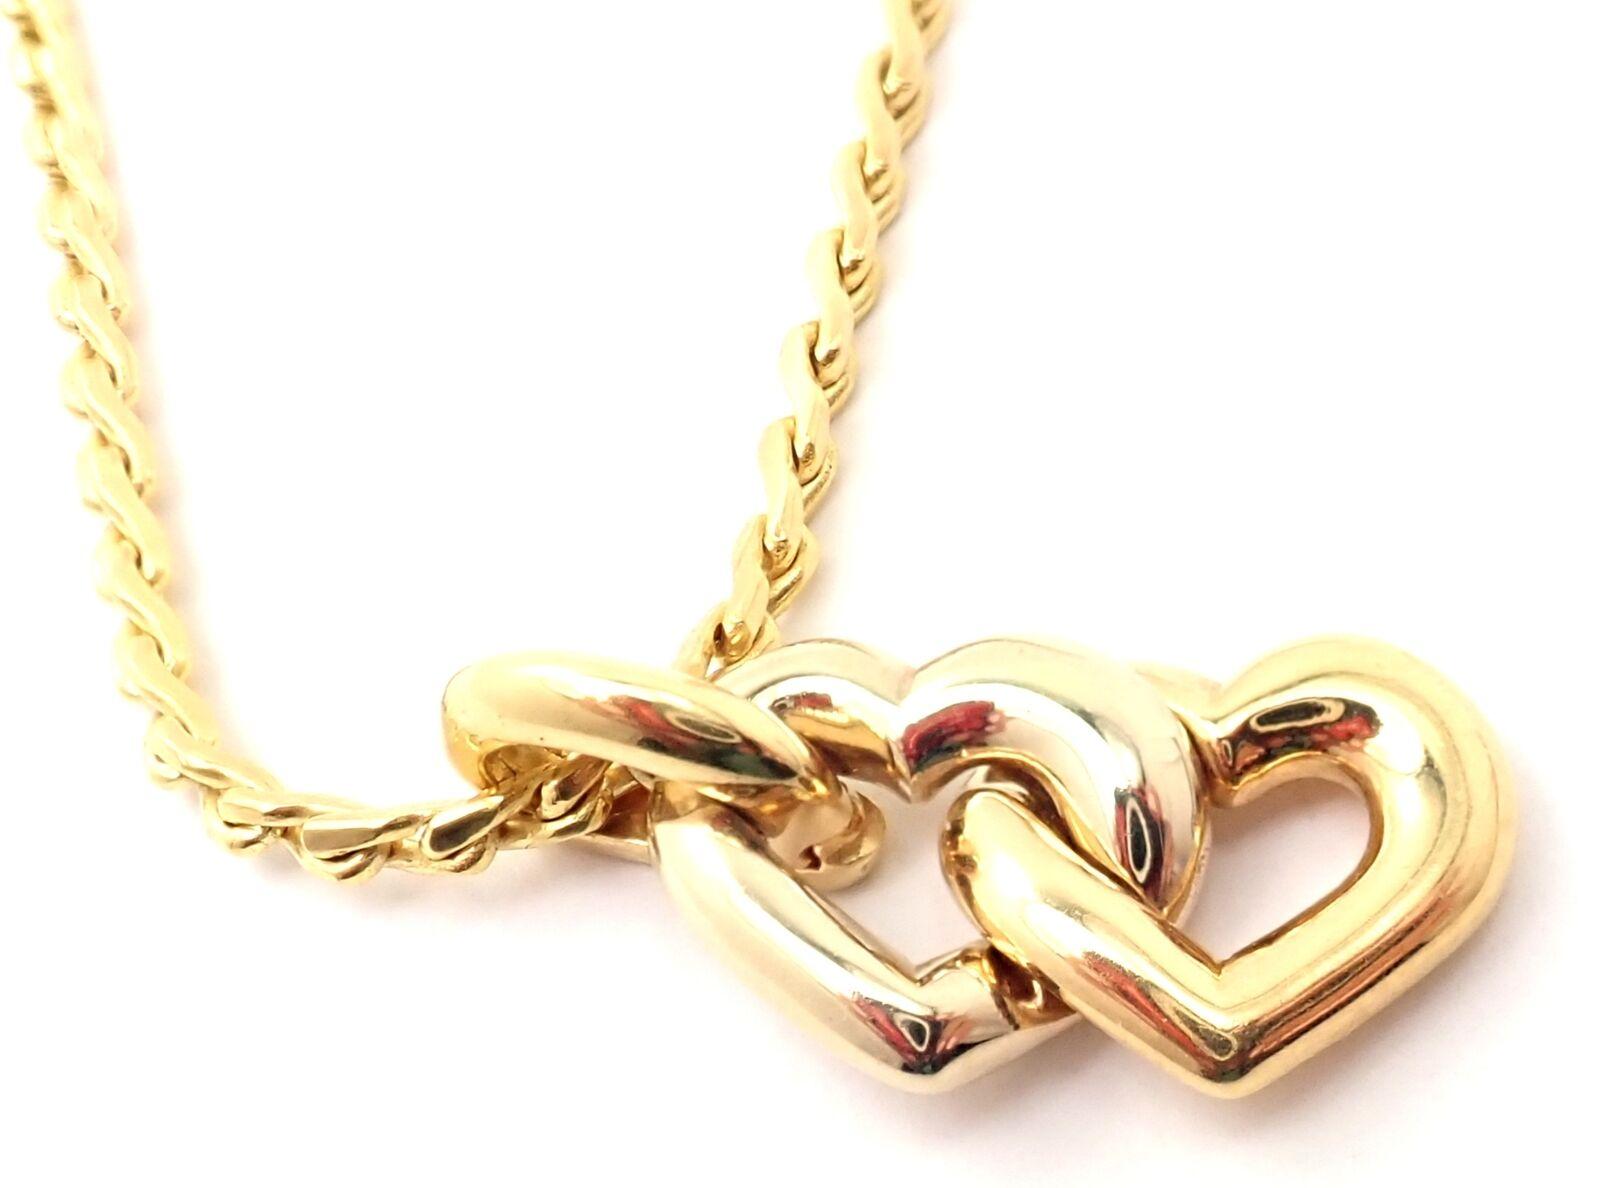 18k Yellow And White Gold Double Heart Pendant Necklace by Cartier. 
Details: 
Pendant : 29mm x 14mm
Chain: Length 19.5